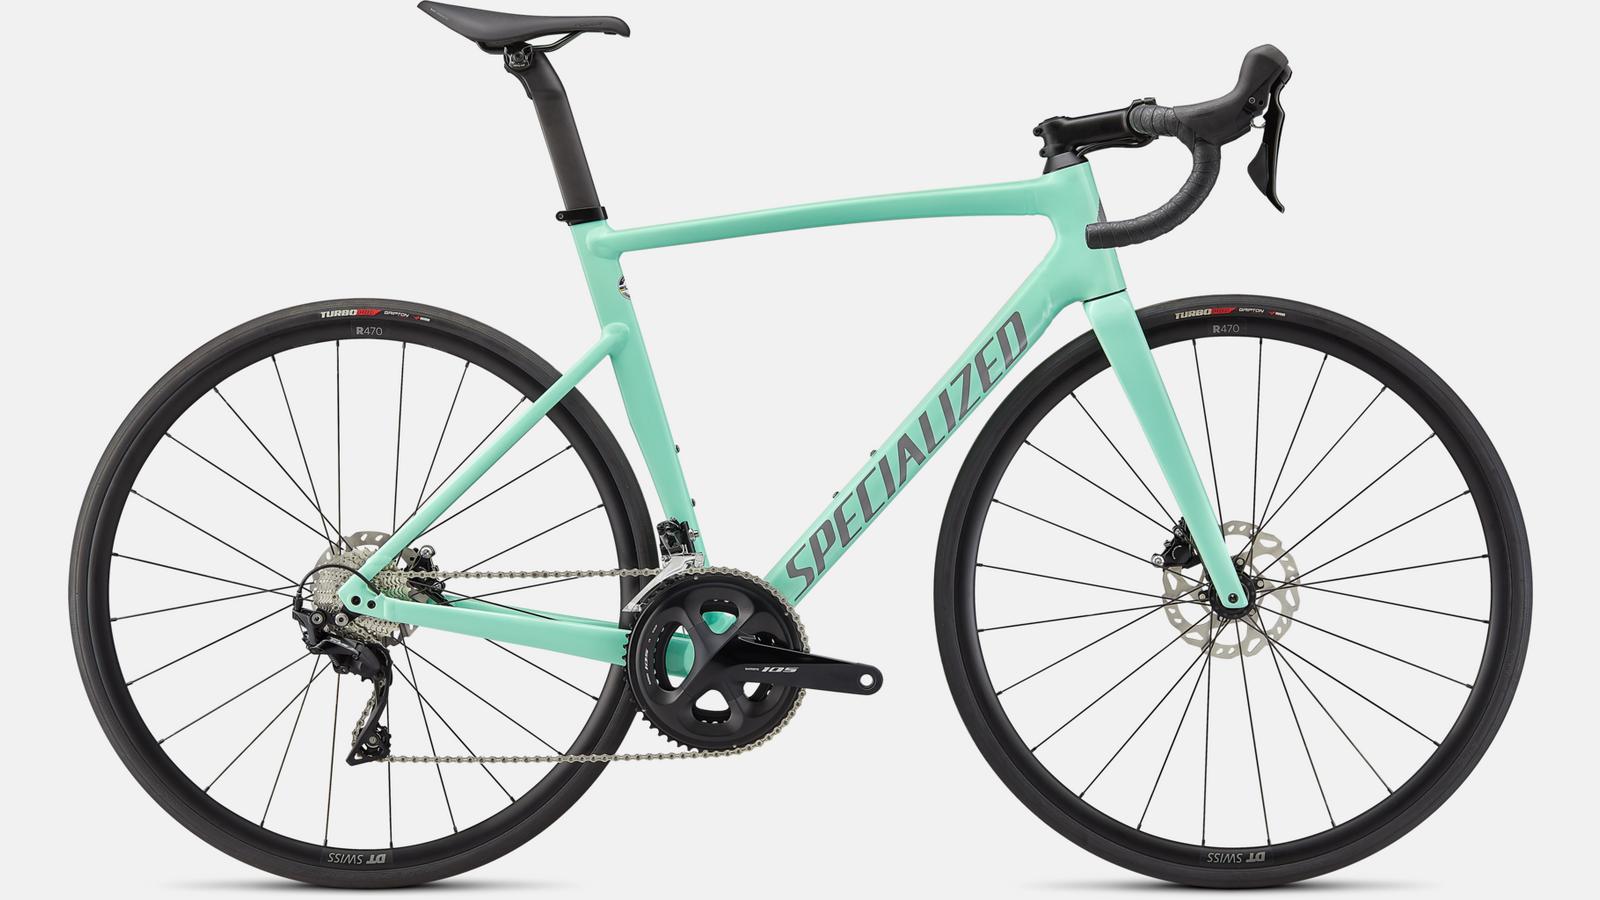 Mint green Specialized Allez Sprint Comp aluminum road bike with Shimano 105 groupset and hydraulic disc brakes.